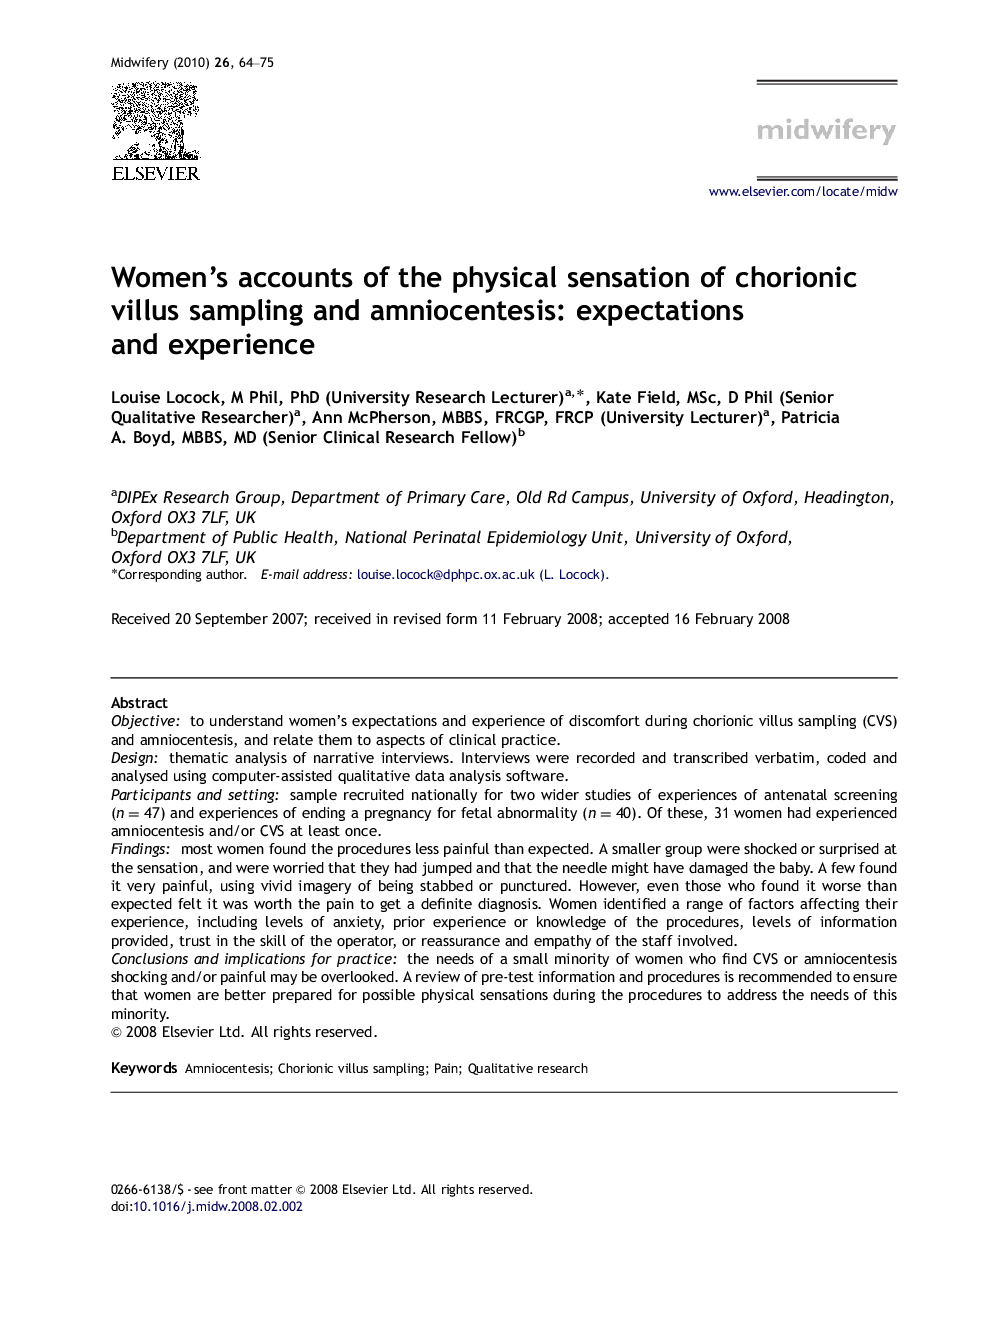 Women's accounts of the physical sensation of chorionic villus sampling and amniocentesis: expectations and experience